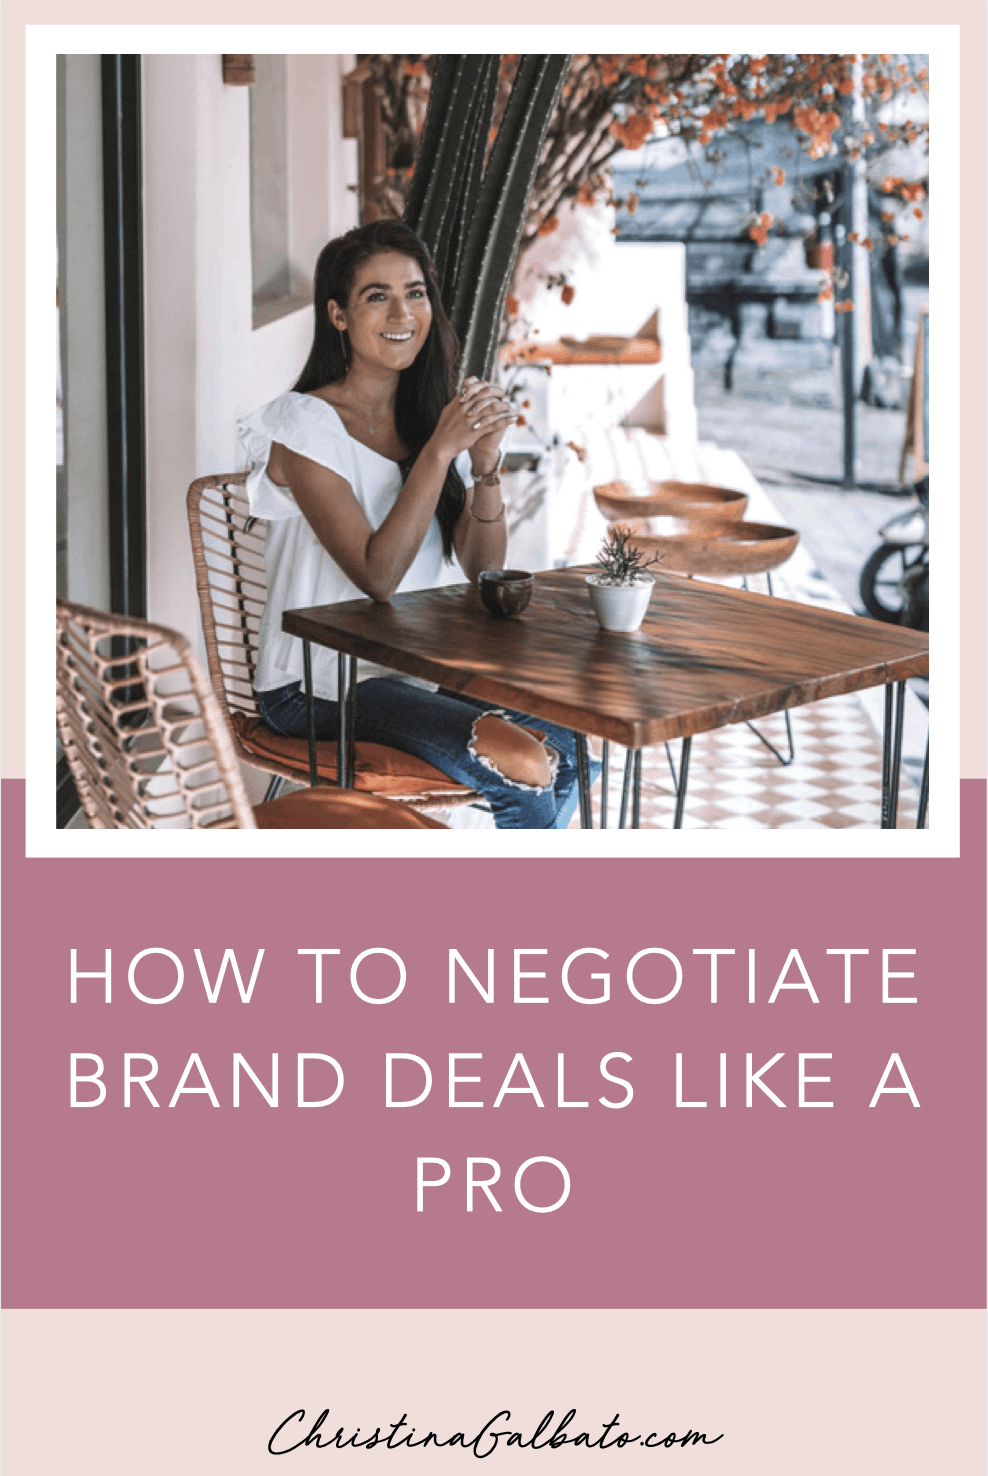 How to negotiate brand deals like a pro